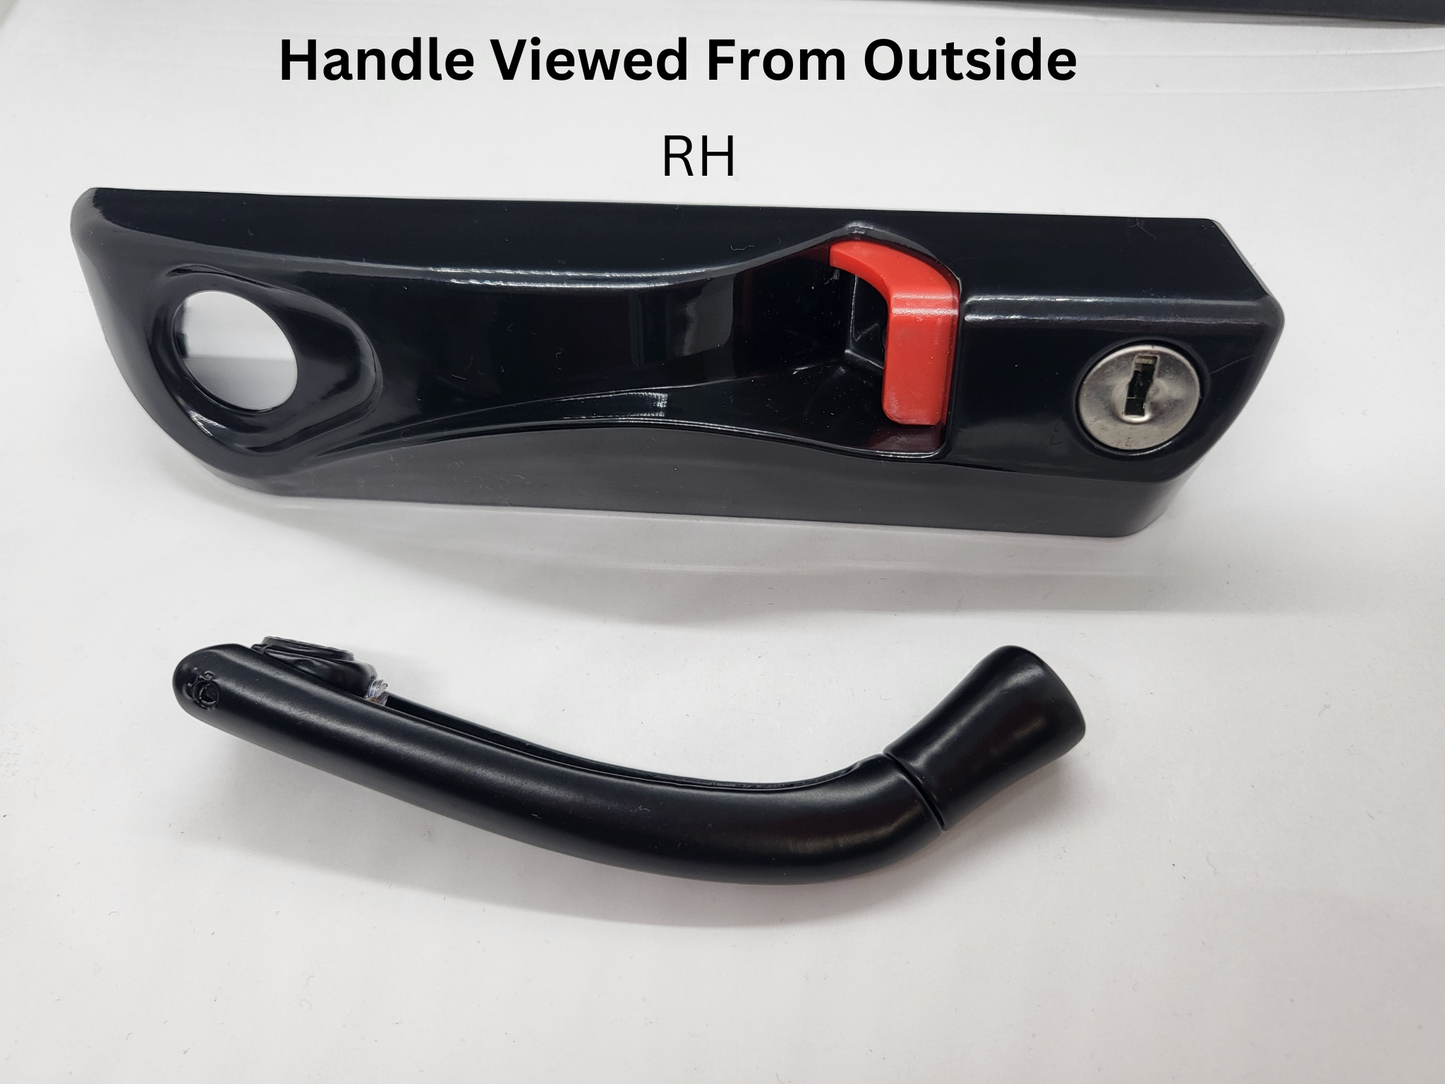 COVER / HANDLE for awning window by Trend (made by FHS)